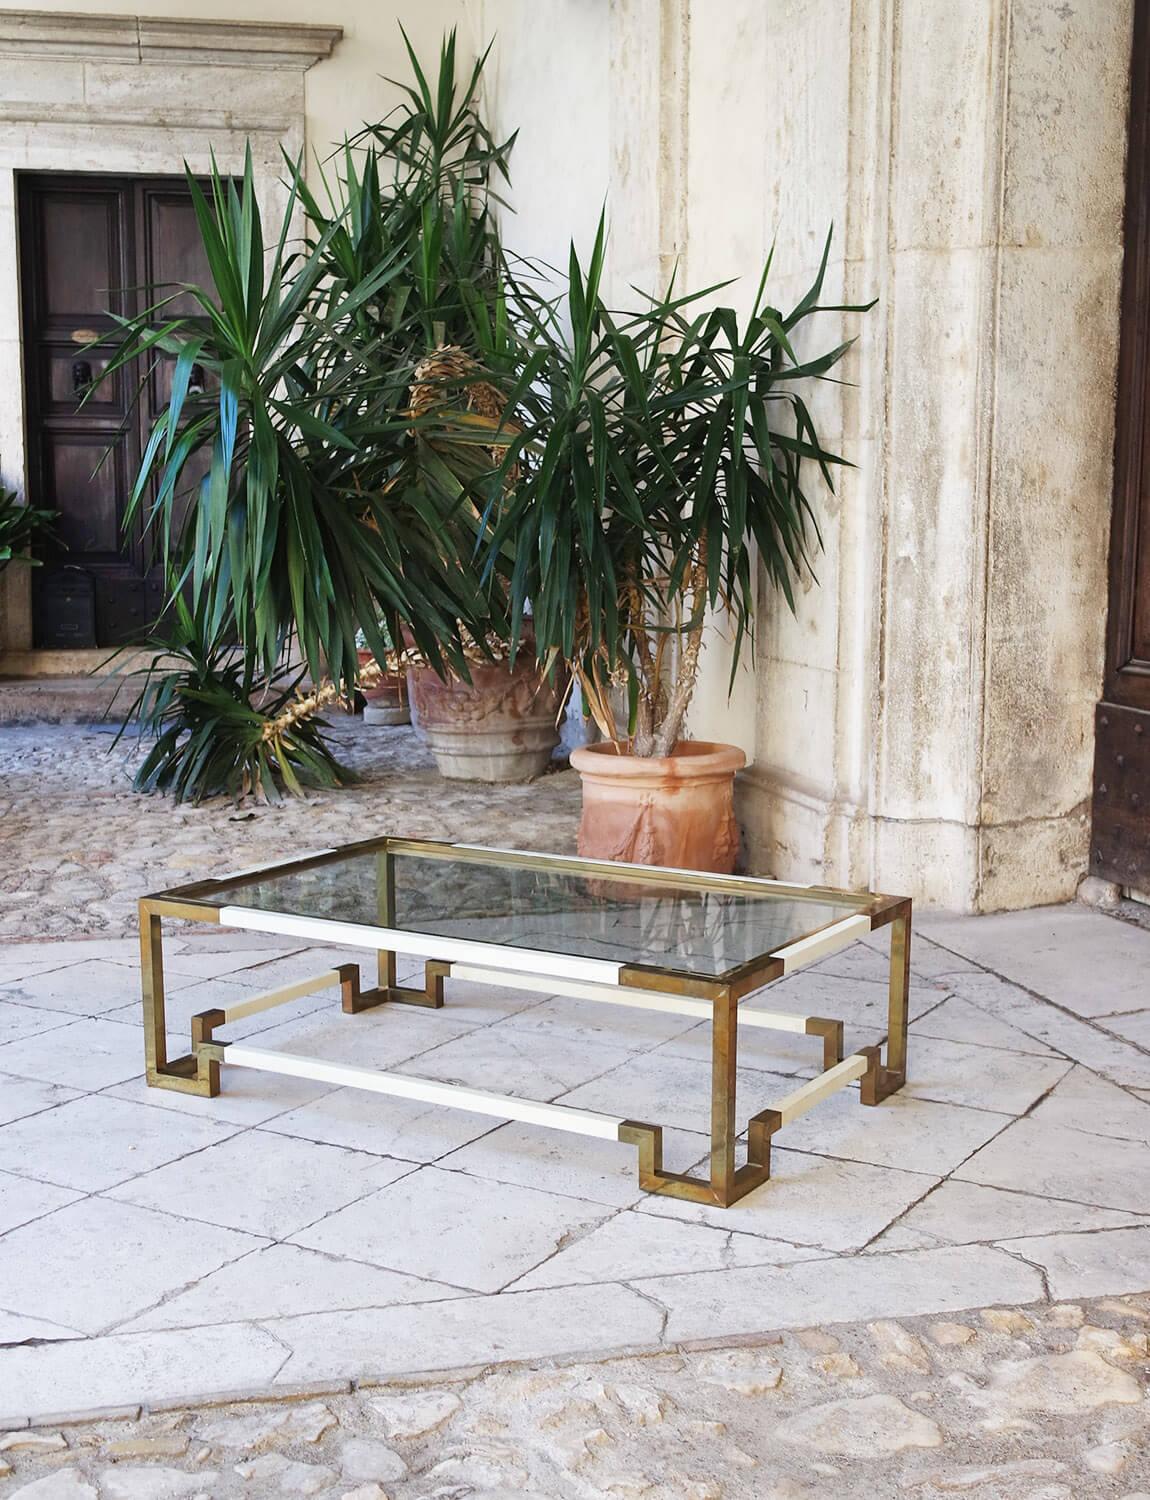 Romeo Rega cream resin and brass coffee table. This 1970s piece has a glass top and interestingly designed geometric legs. Please note, this is a vintage piece and there is a patina on the brass and light scratches and scuffs on the cream resin.  It